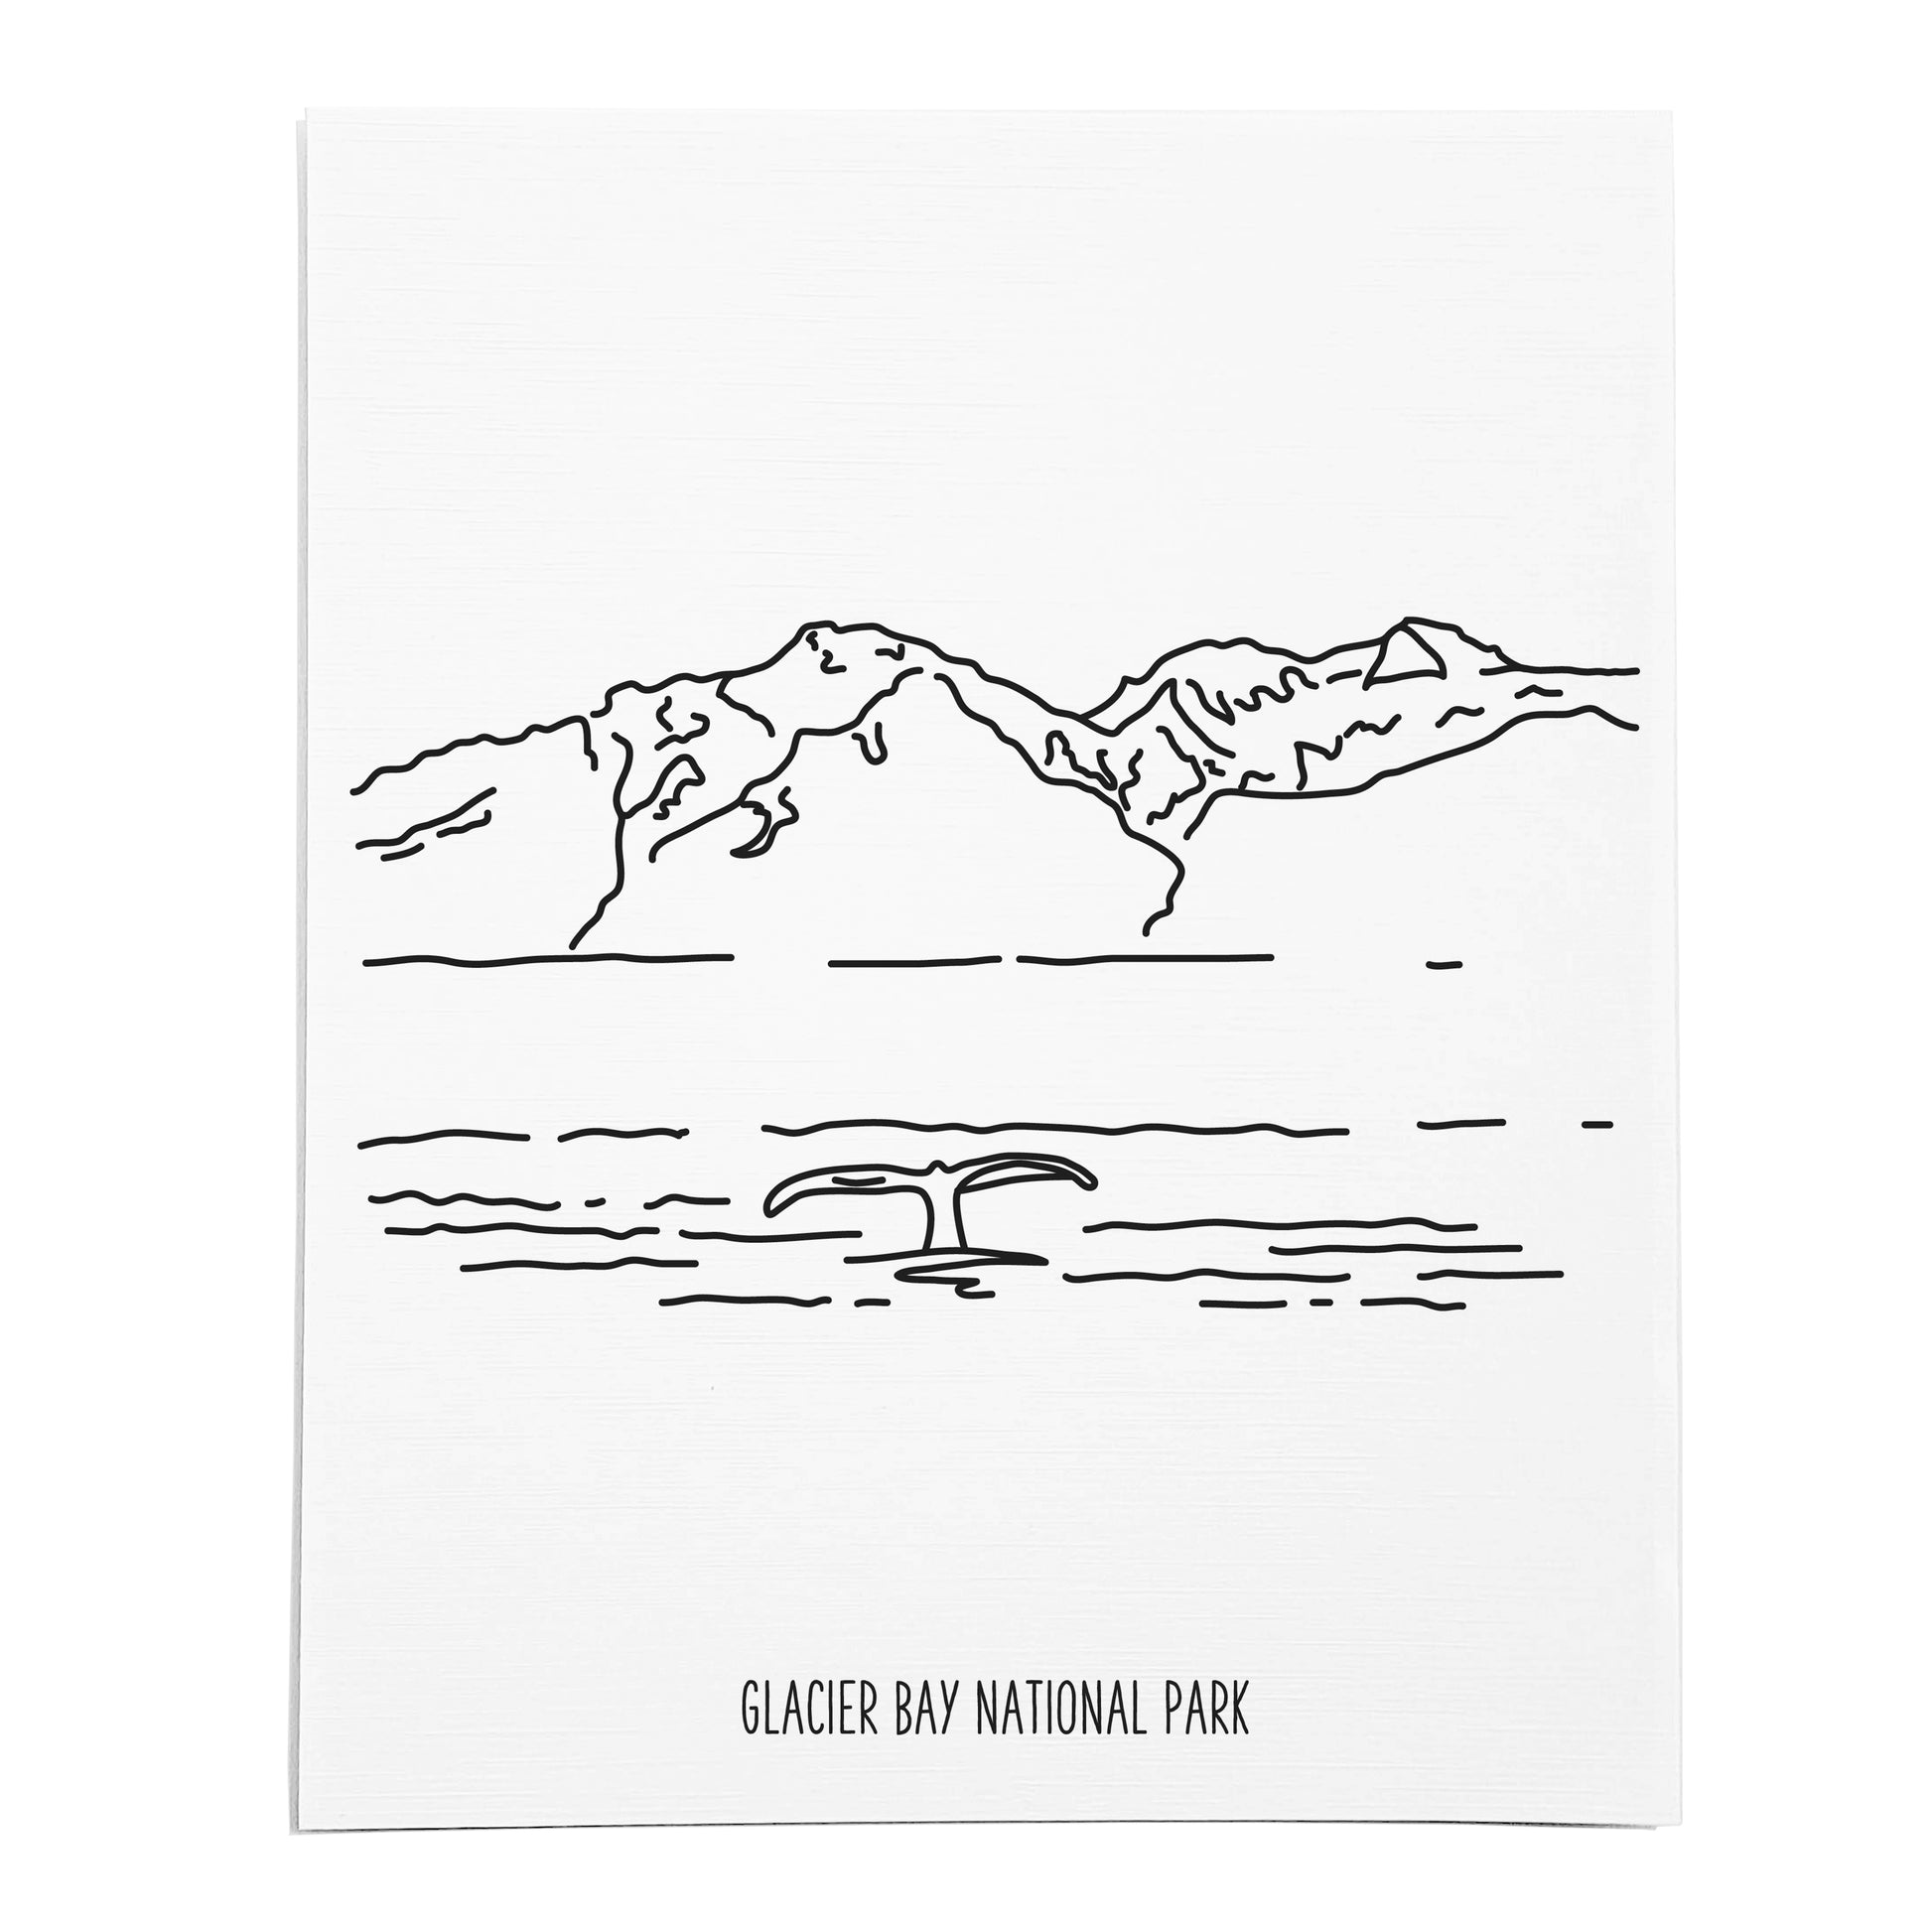 An art print featuring a line drawing of Glacier Bay National Park on white linen paper